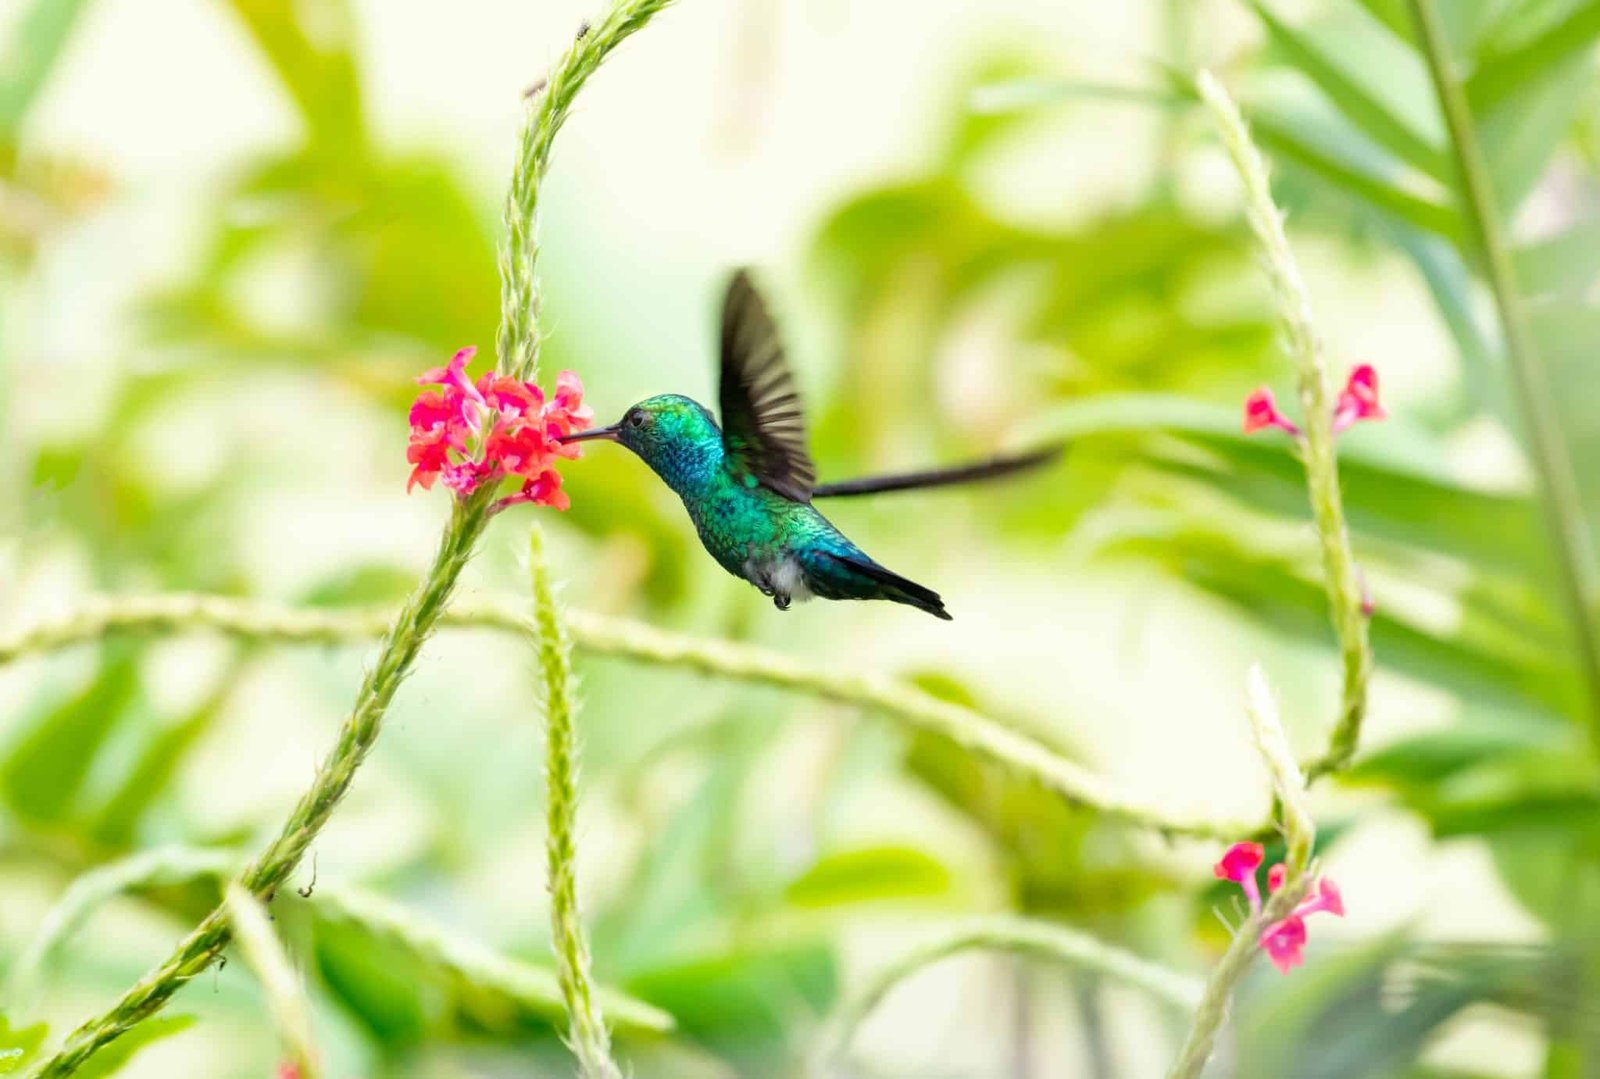 Blue-chinned Sapphire hummingbird, Chlorestes notata, feeding on pink Vervain flowers on the island of Trinidad in the Caribbean.